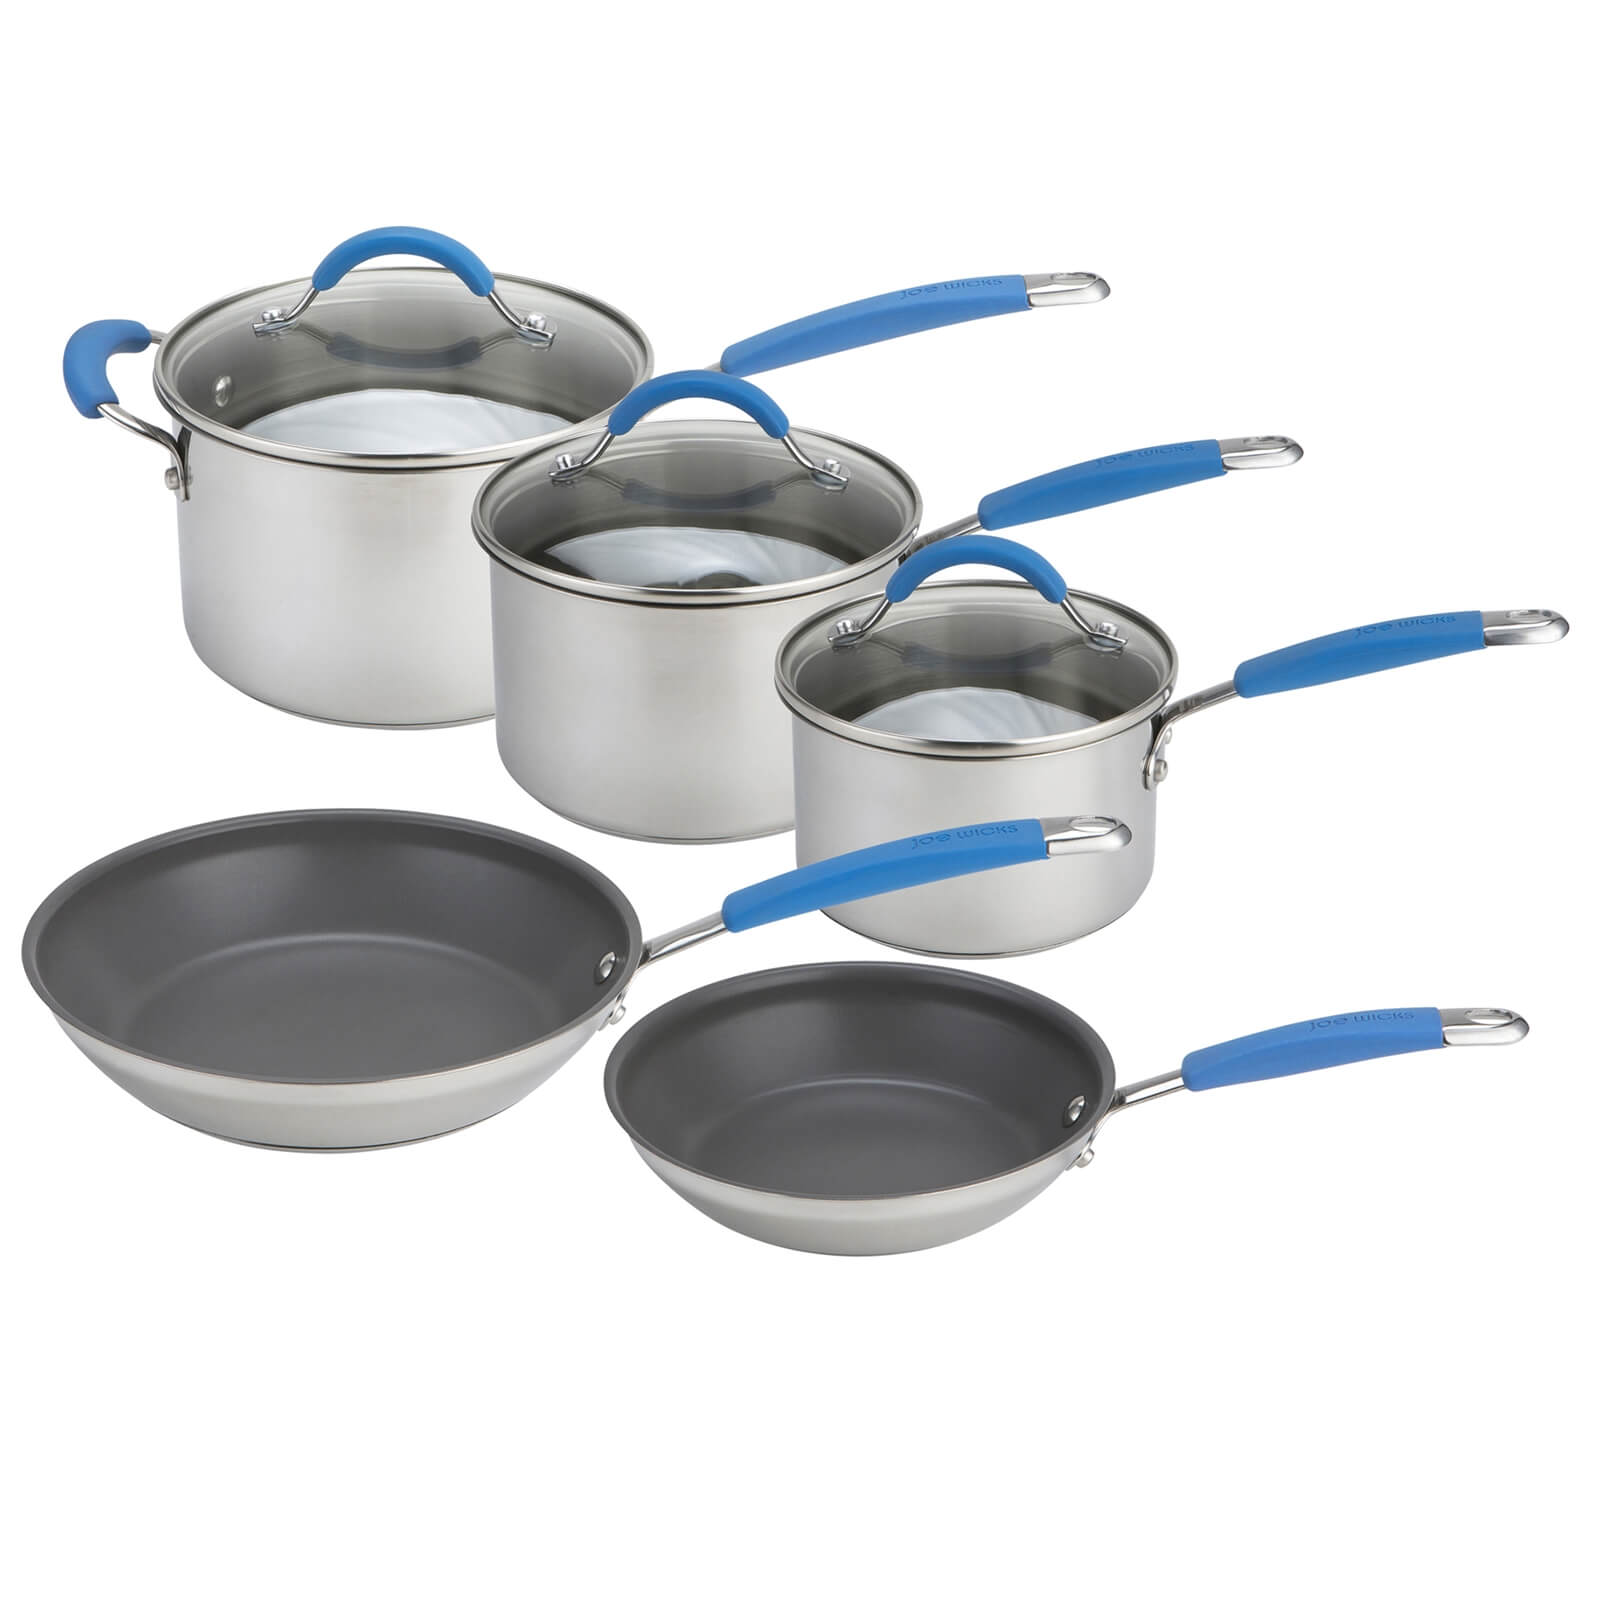 Joe Wicks Quick and Even Induction Non-Stick Stainless Steel Cookware - Set of 5